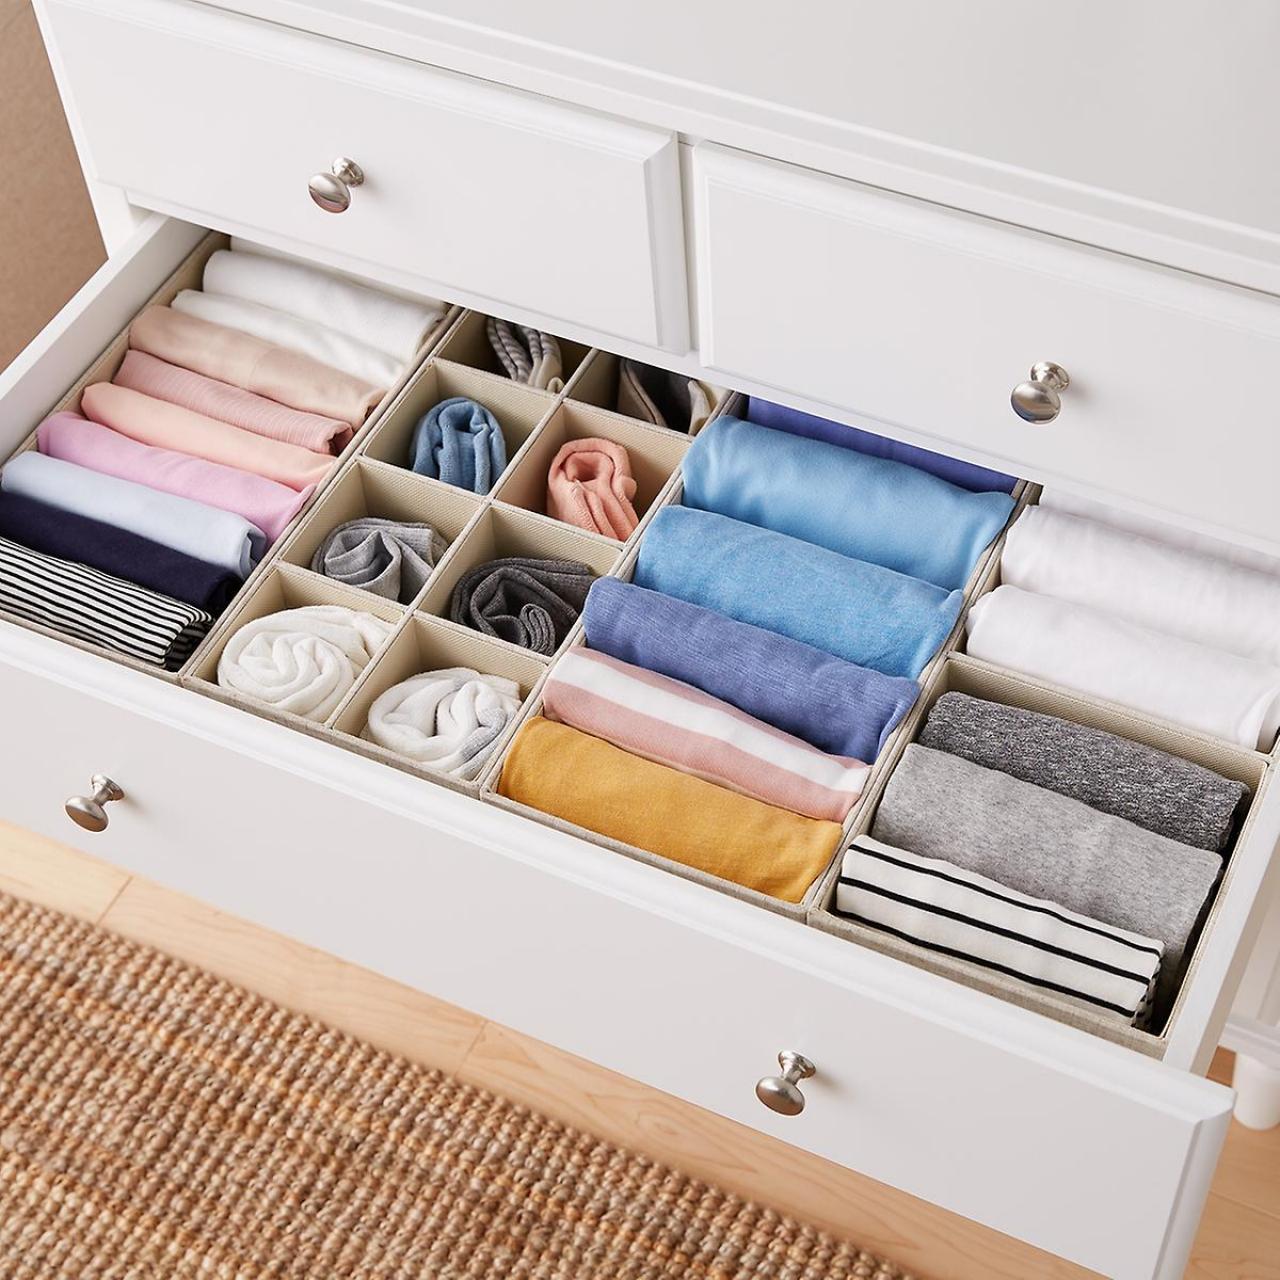 How To Organize Lingerie Drawers – The Laundress